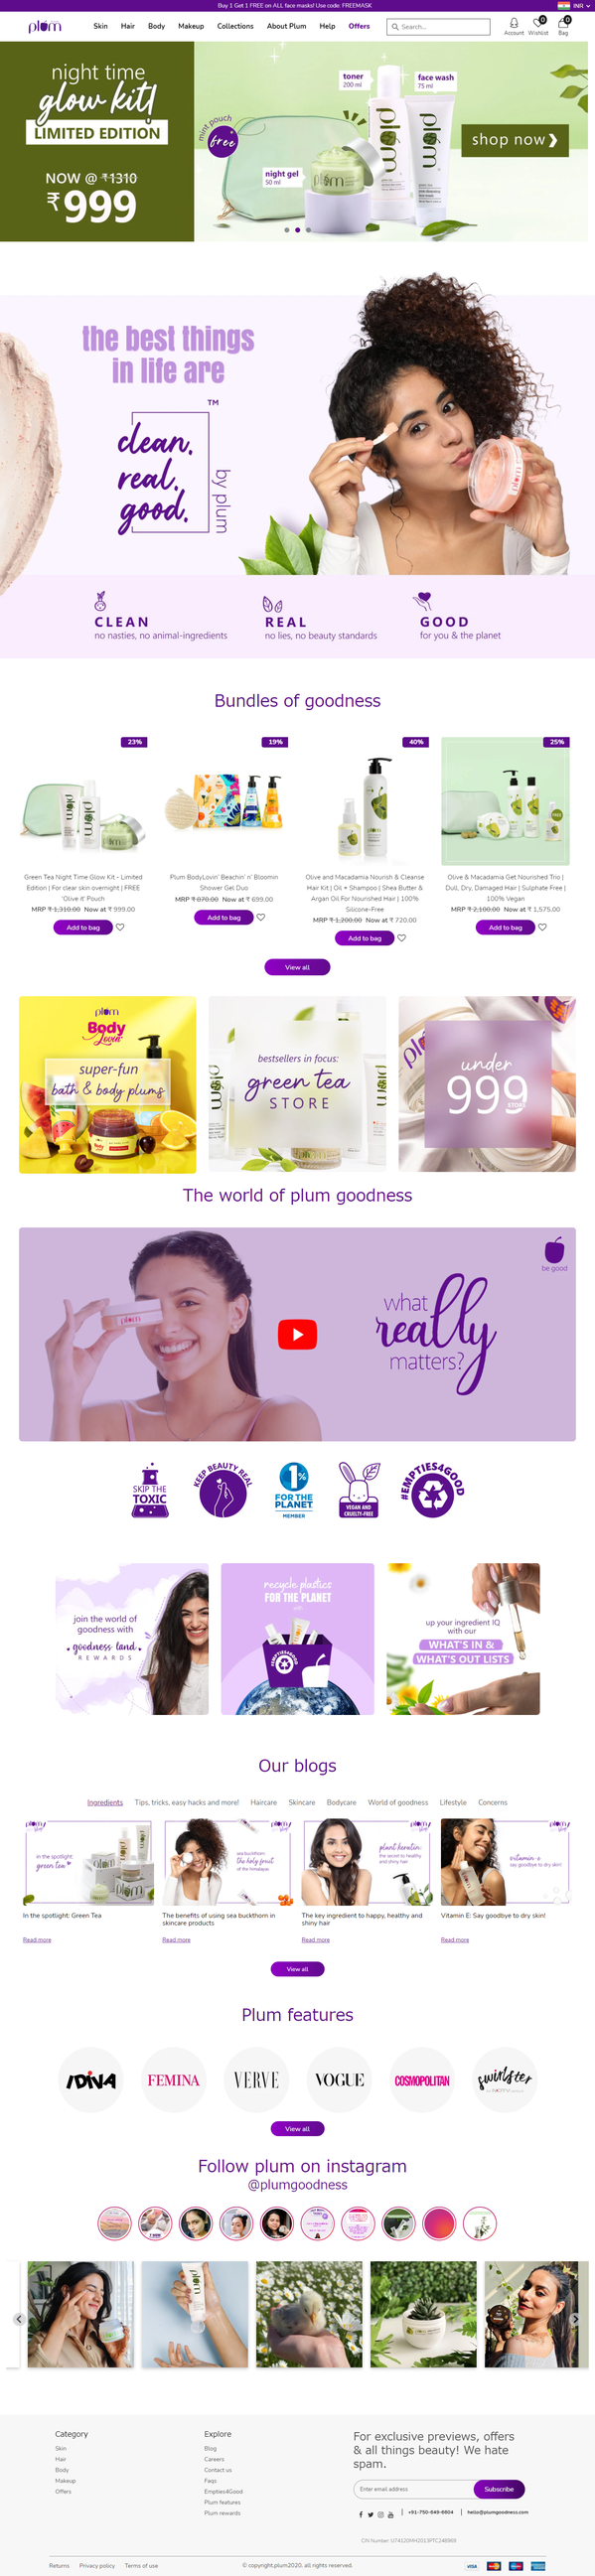 -Free and Natural Skincare Products Online - Plum _ - plumgoodness.com.png